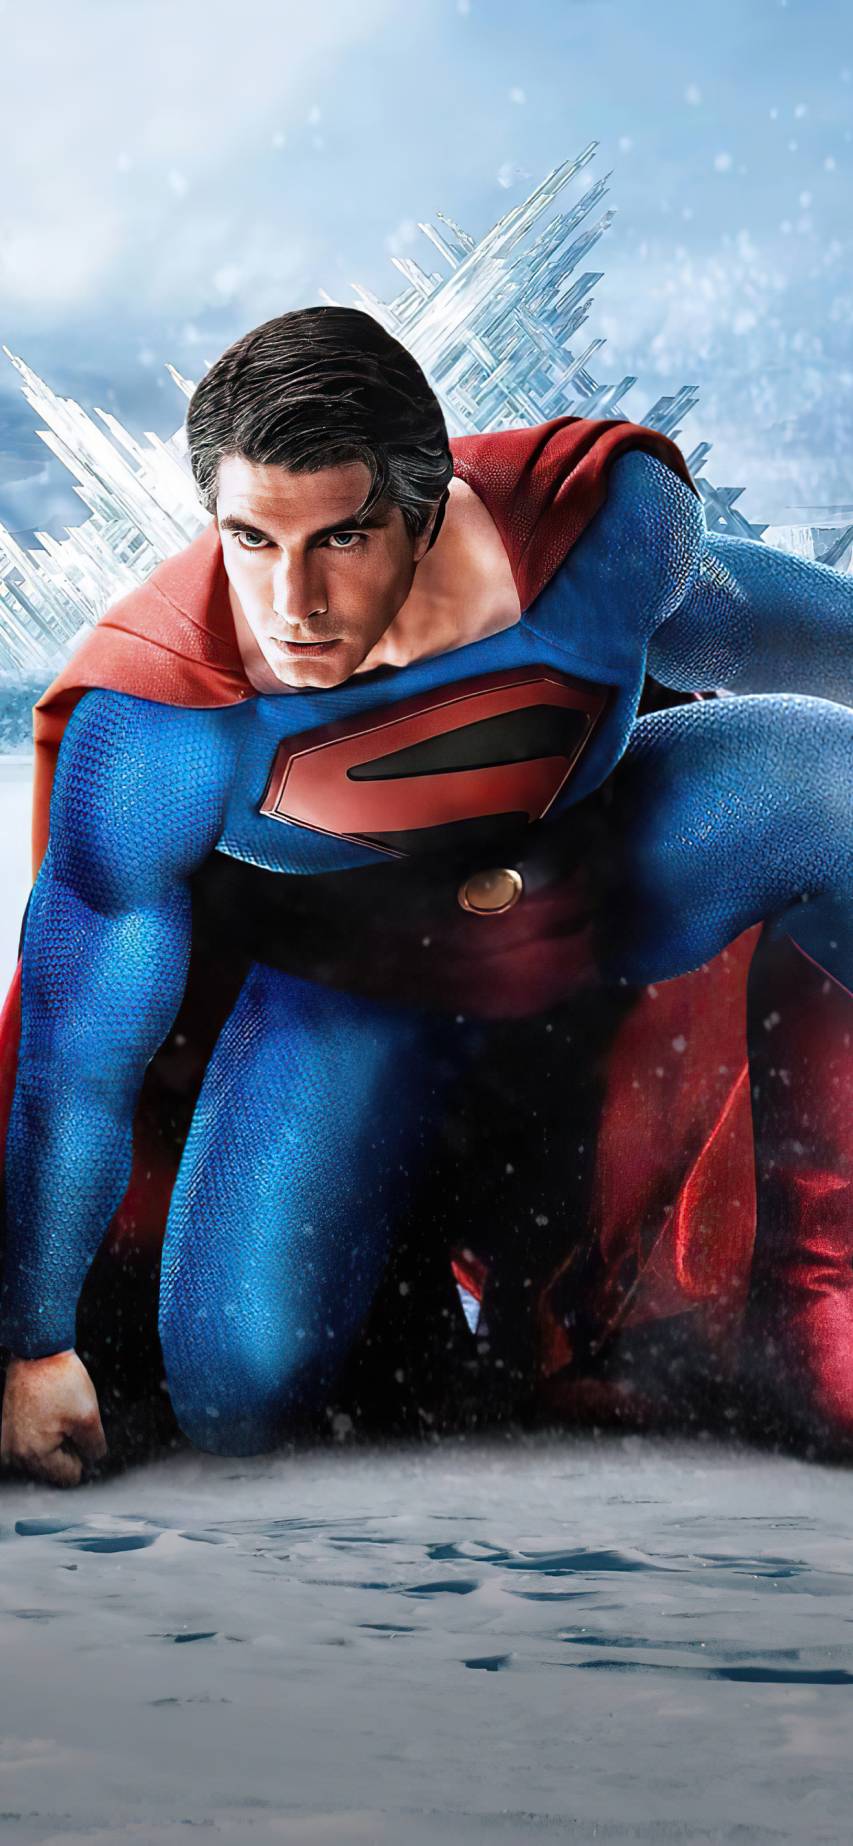 Superman Background Pictures for Android